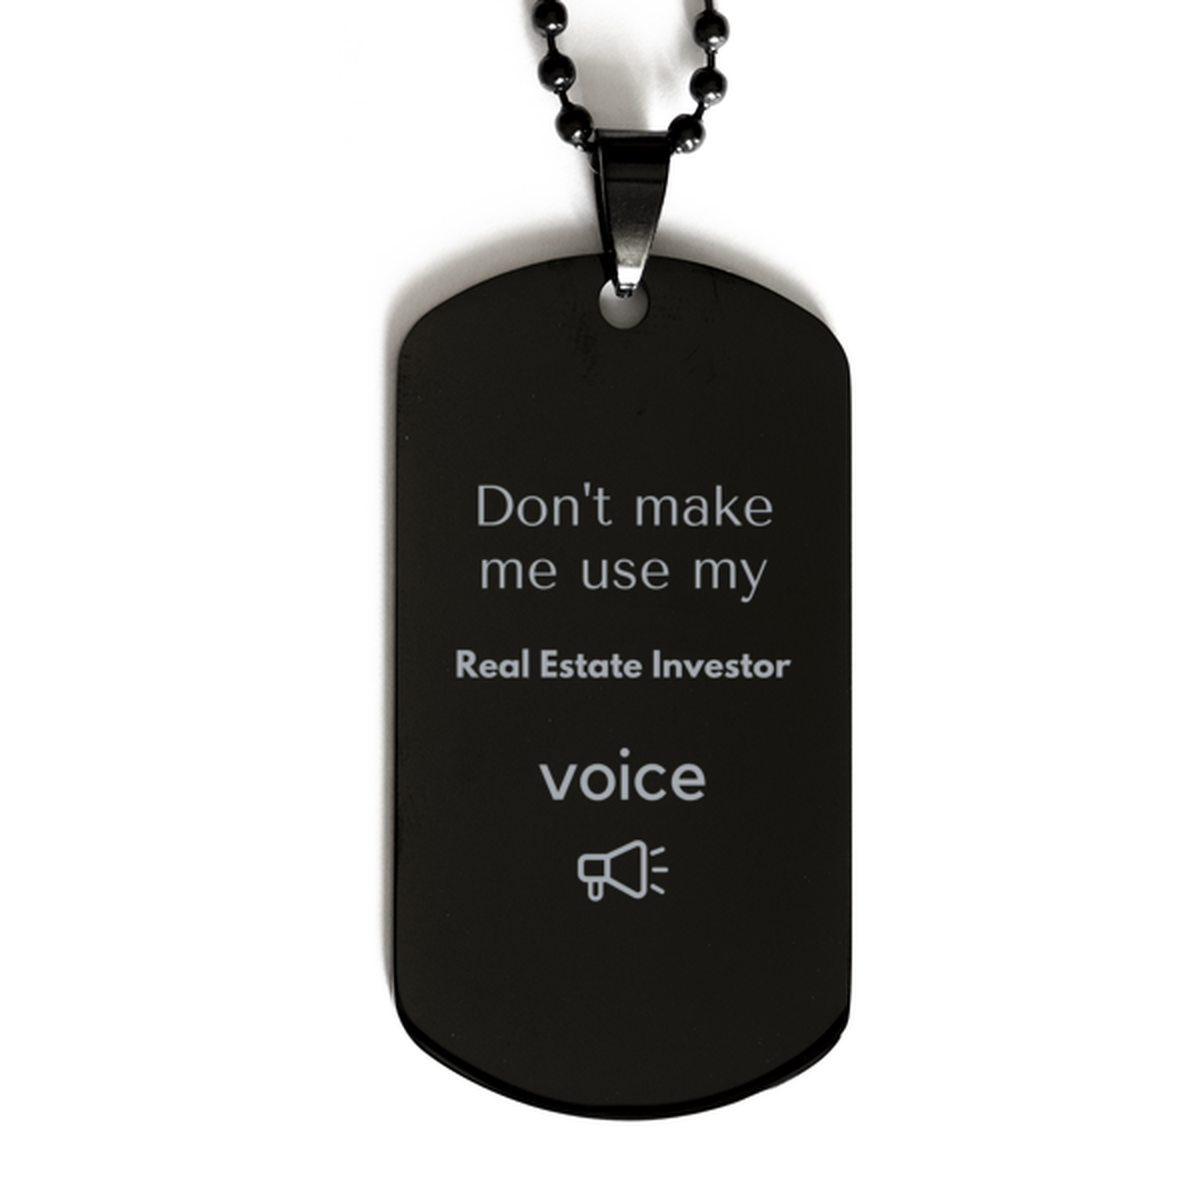 Don't make me use my Real Estate Investor voice, Sarcasm Real Estate Investor Gifts, Christmas Real Estate Investor Black Dog Tag Birthday Unique Gifts For Real Estate Investor Coworkers, Men, Women, Colleague, Friends